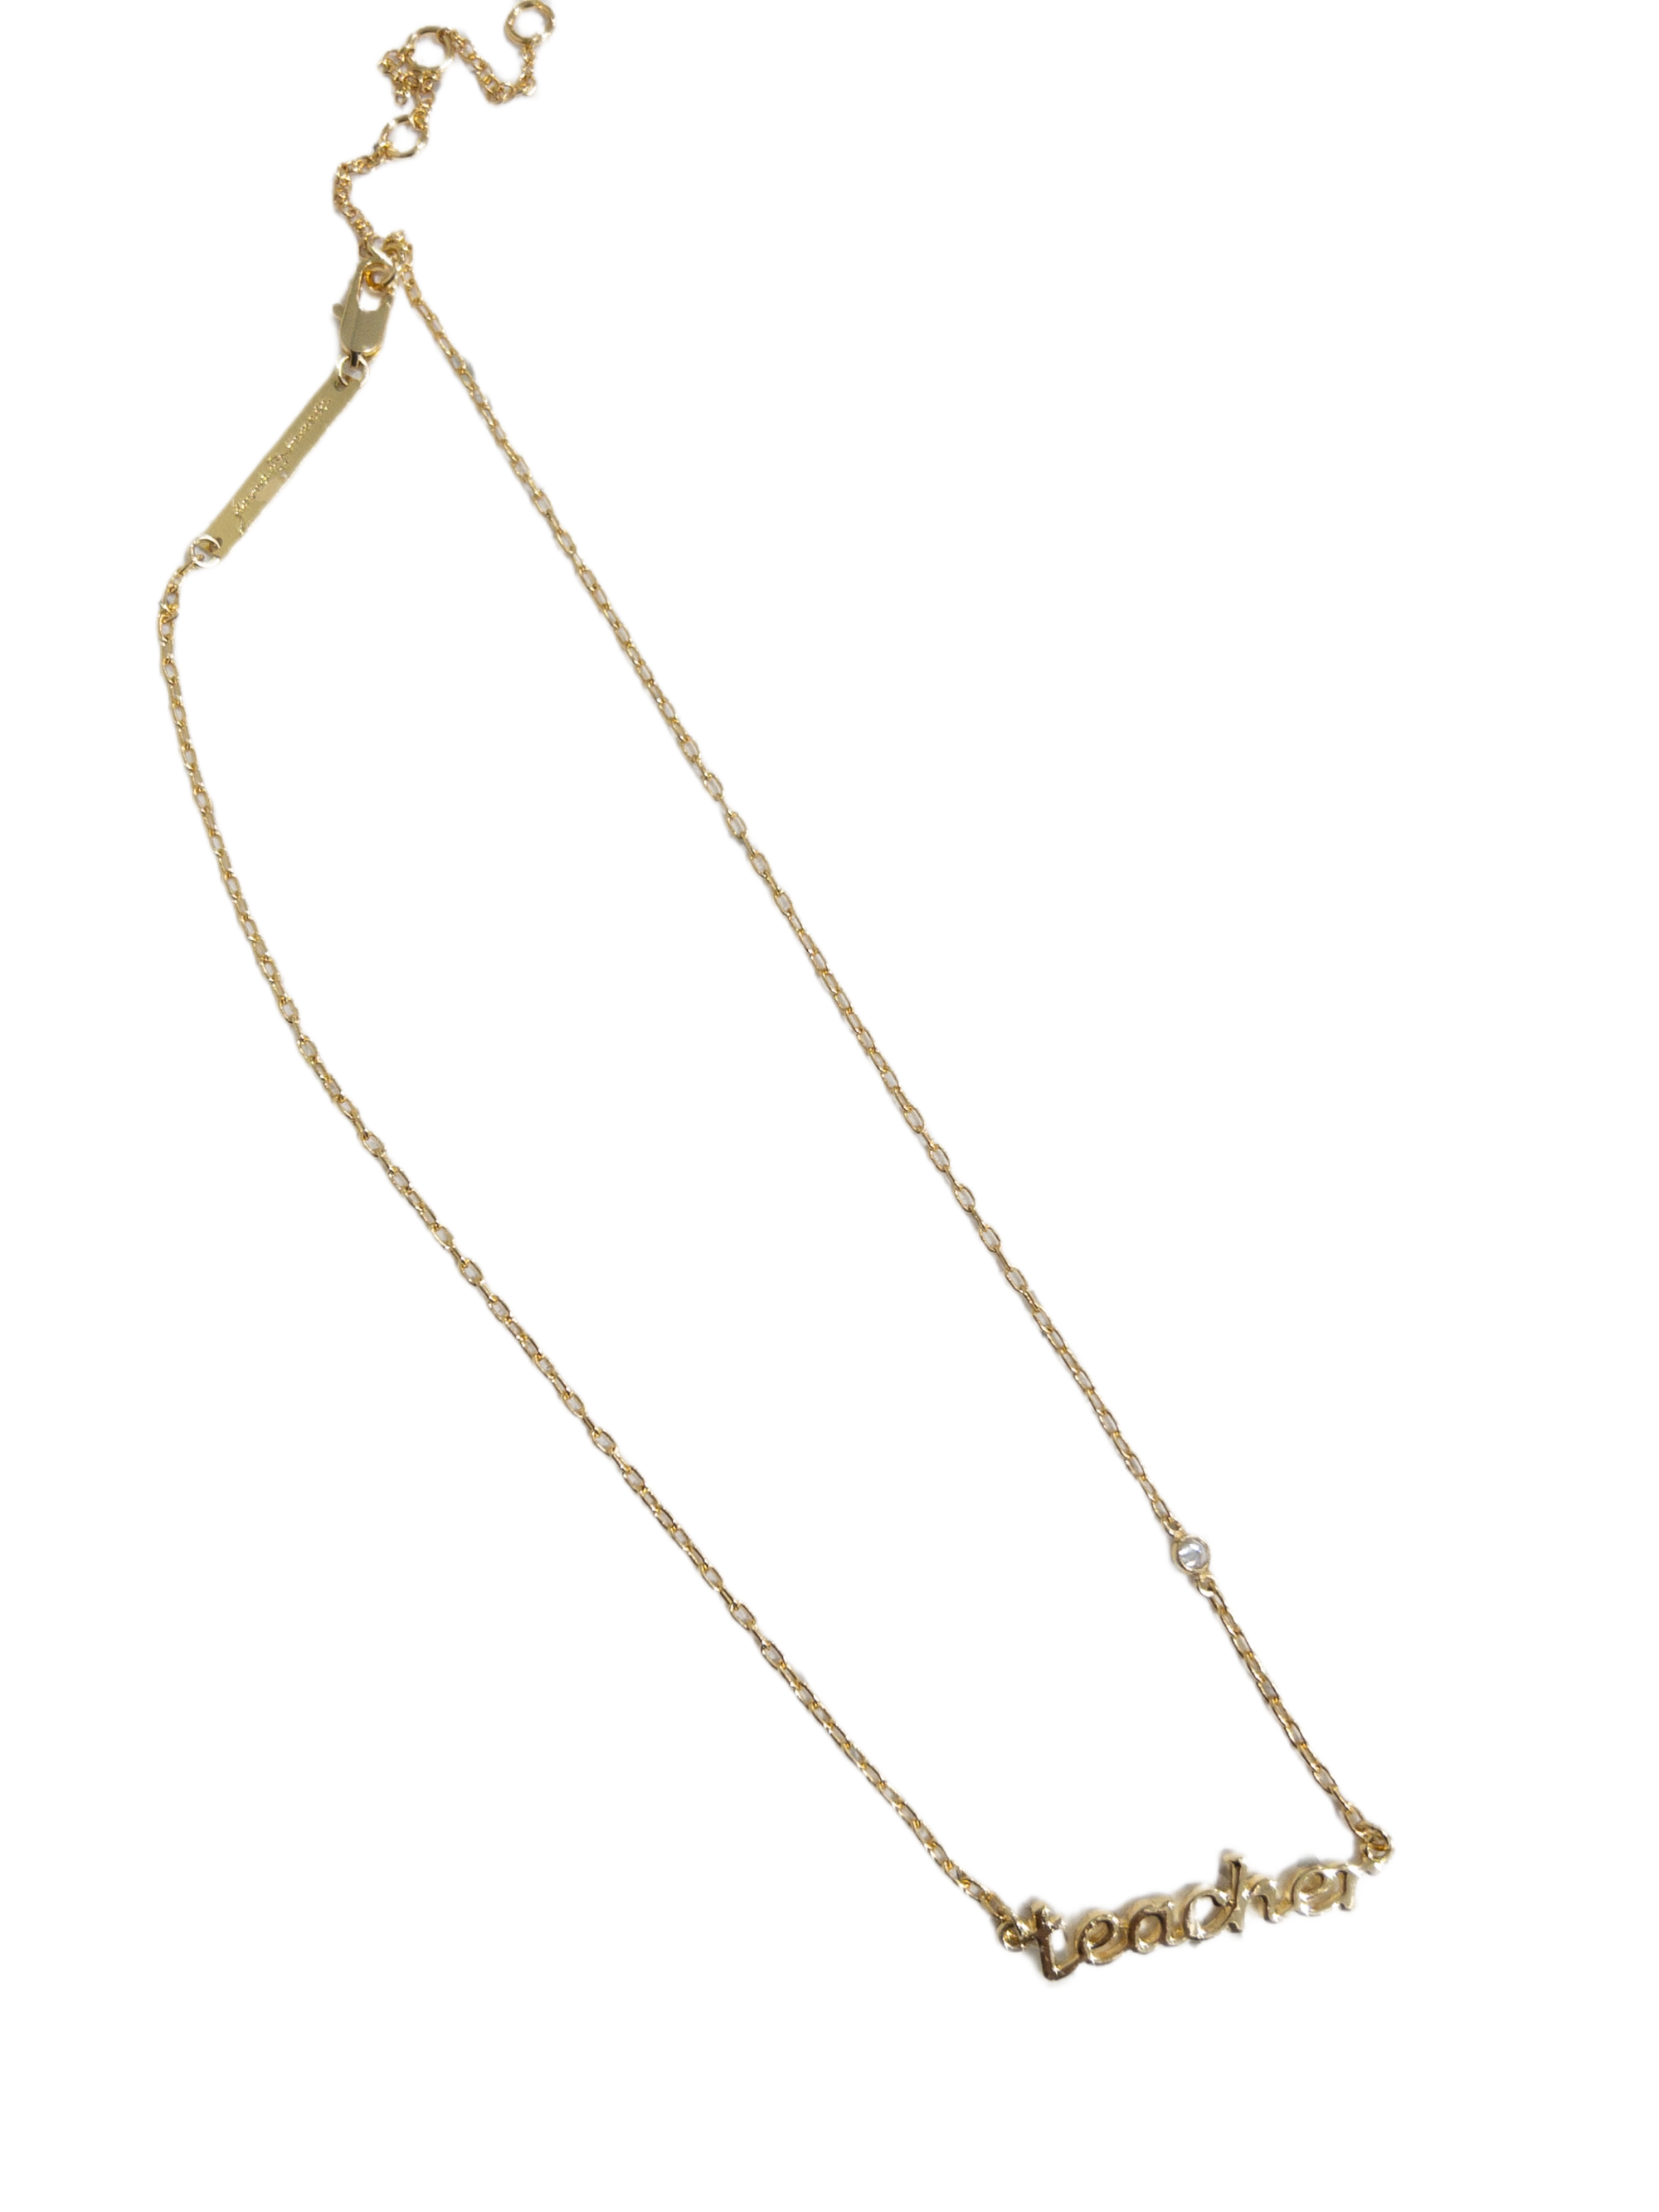 18K GOLD PLATED "TEACHER" WITH CLEAR CRYSTAL ACCENT NECKLACE